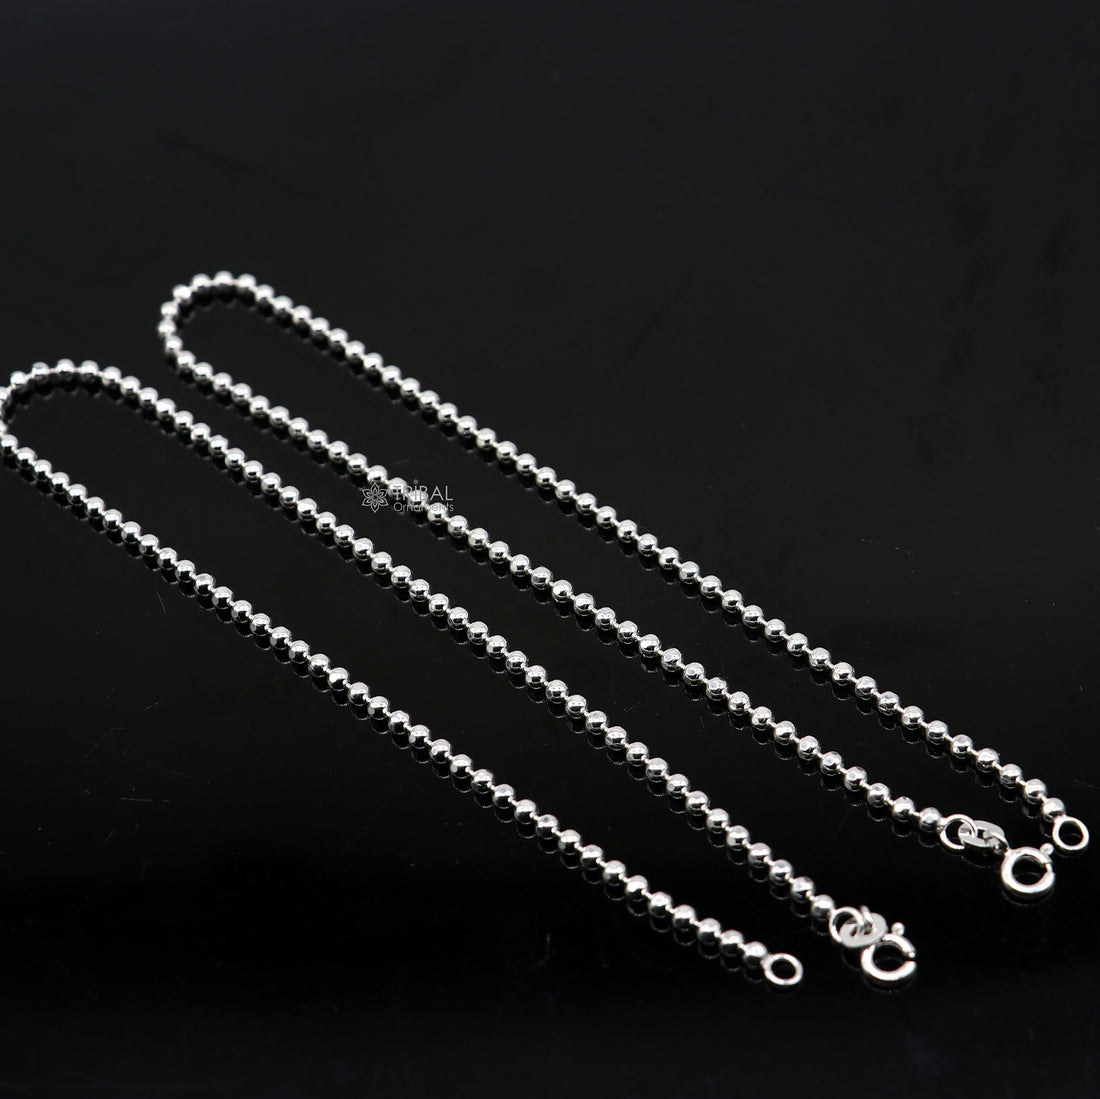 2mm 10.5925 sterling silver beaded/ball chain anklet bracelet amazing light weight delicate anklets belly dance silver jewelry ank611 - TRIBAL ORNAMENTS